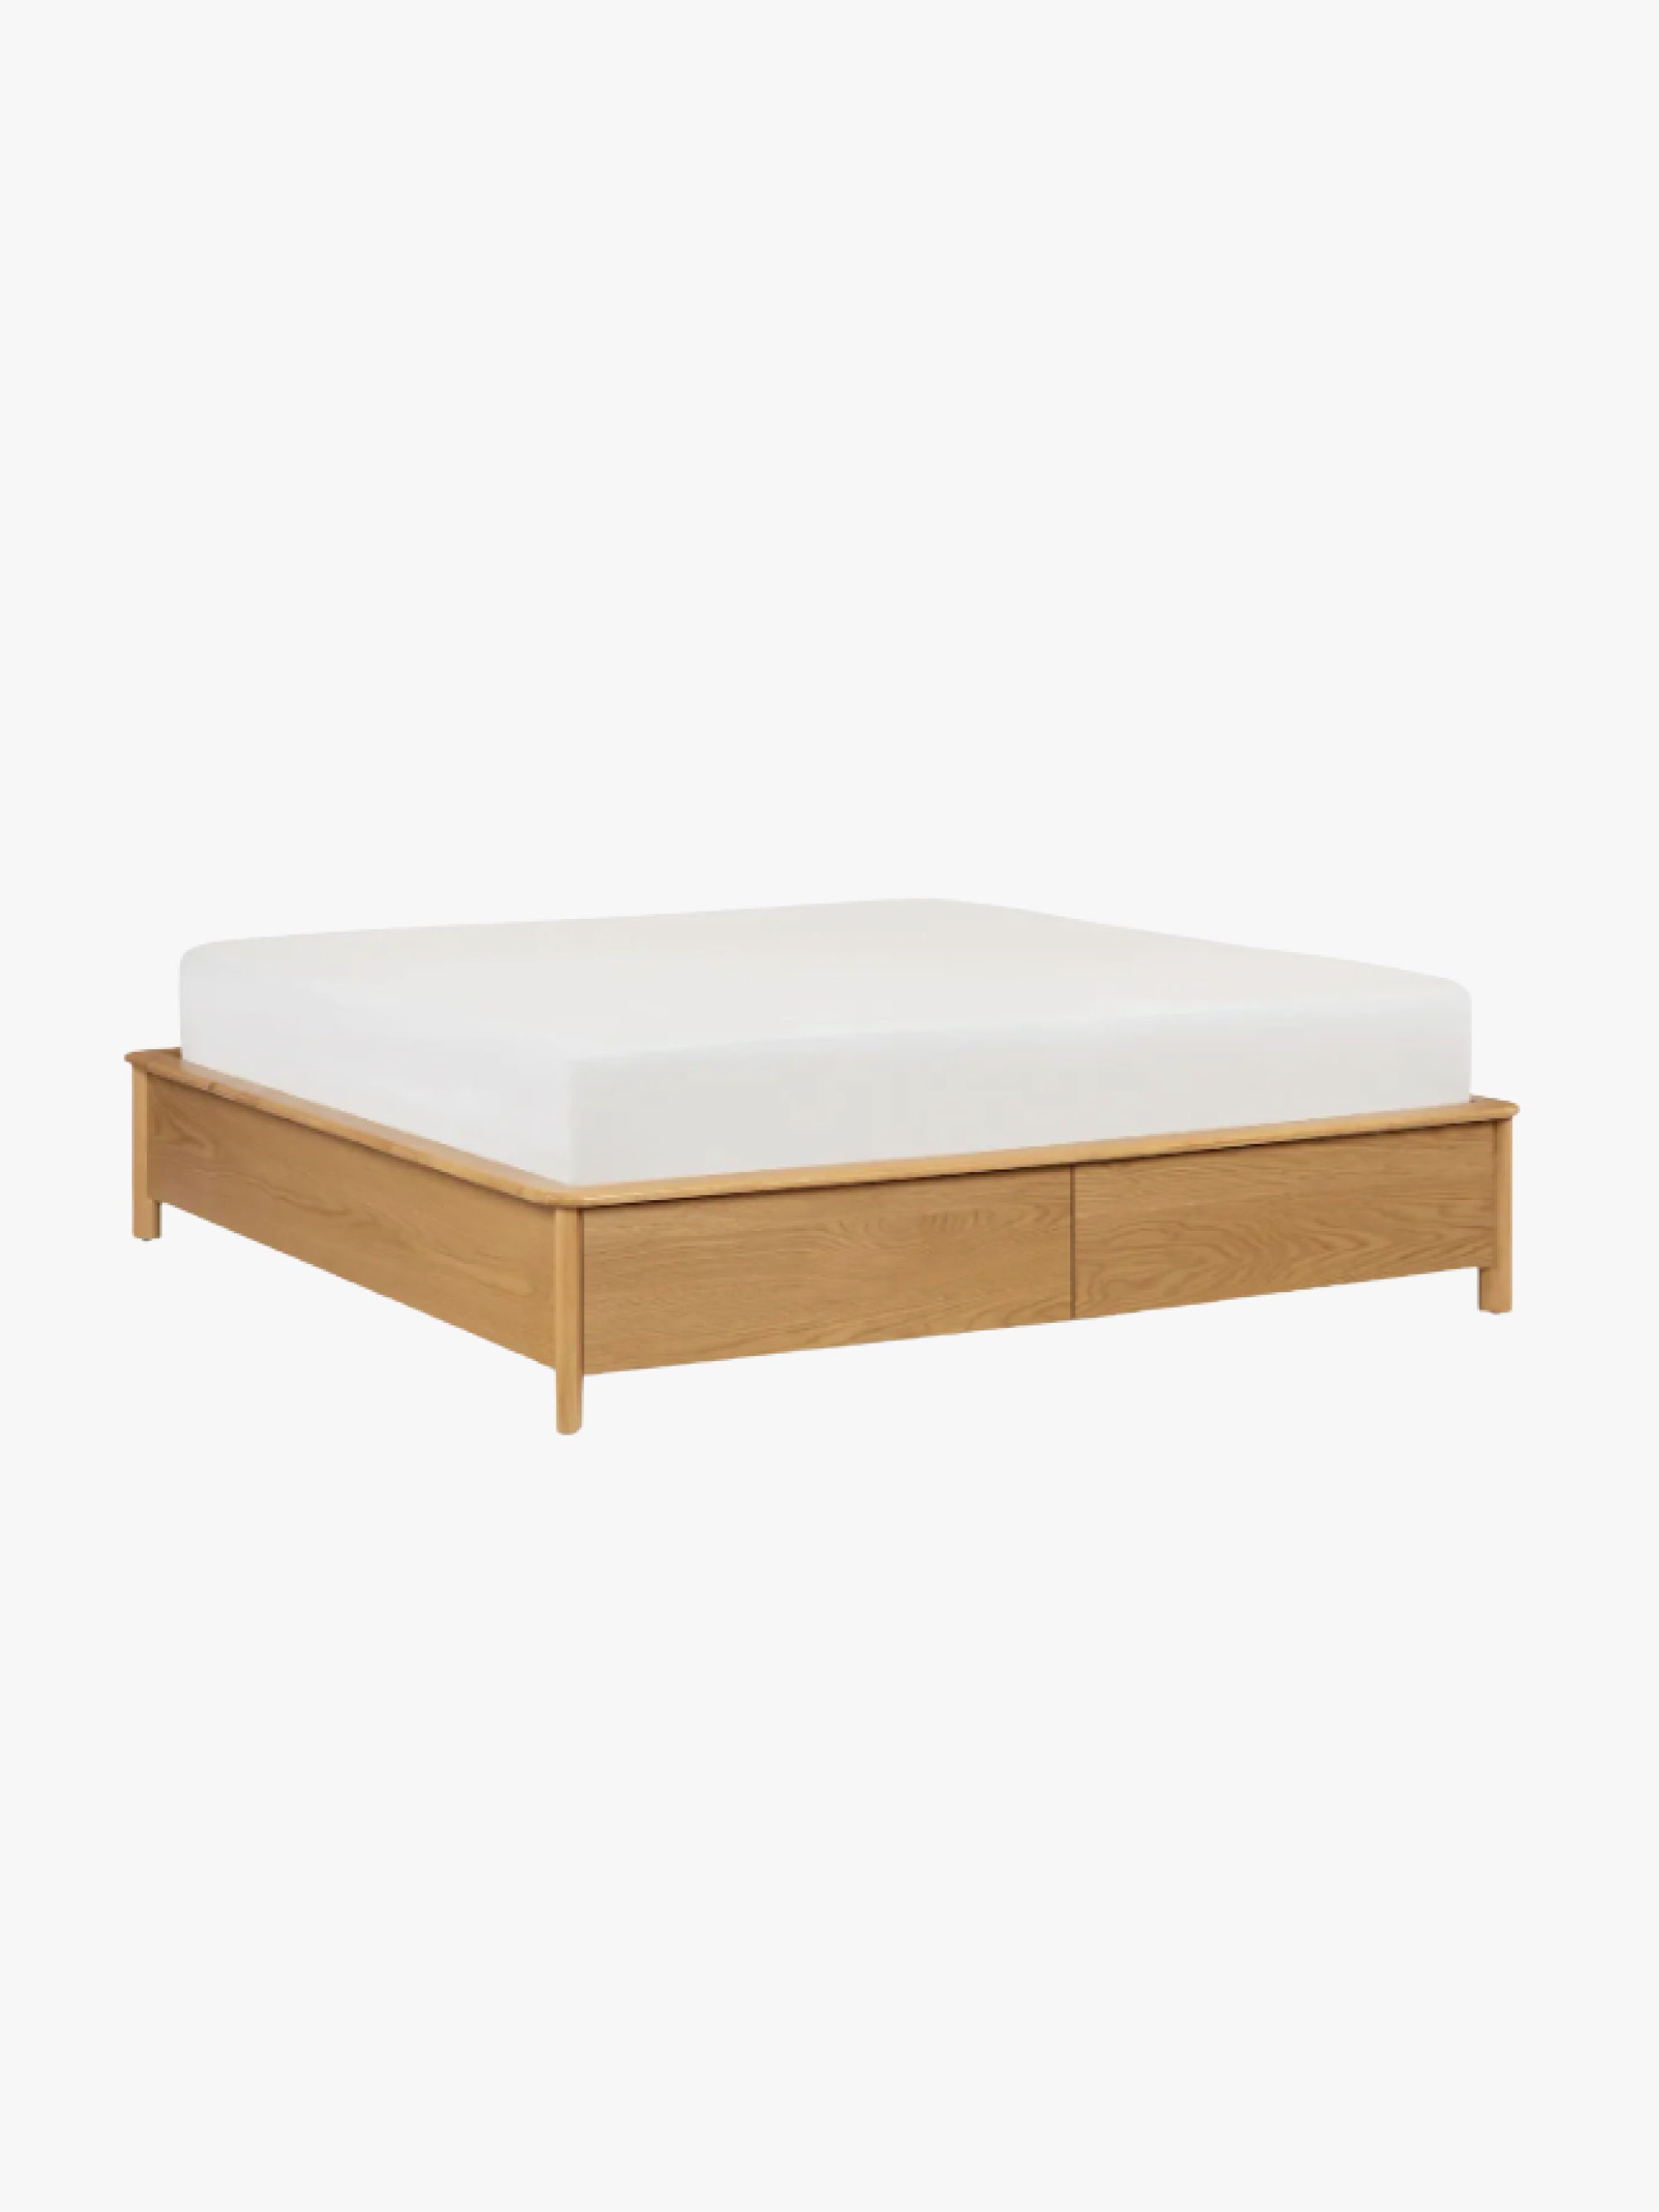 <p>Available in two wood stains—oak and walnut—this classic frame features two massive underbed storage drawers. The <a href="https://www.architecturaldigest.com/story/best-mattress-brands?mbid=synd_msn_rss&utm_source=msn&utm_medium=syndication">mattress</a> is supported by sturdy wooden slats, and the brand offers plenty of headboard, <a href="https://www.architecturaldigest.com/gallery/best-nightstands-and-bedside-tables?mbid=synd_msn_rss&utm_source=msn&utm_medium=syndication">nightstand</a>, and dresser options for mixing and matching your bedroom set.</p> <ul> <li><strong>Sizes available:</strong> Queen, king</li> <li><strong>Colors available:</strong> Oak or walnut stain</li> <li><strong>Storage type:</strong> Two underbed storage drawers</li> <li><strong>Materials:</strong> Oak veneer, MDF, plywood, rubberwood, acacia, iron</li> <li><strong>Weight capacity:</strong> N/A</li> </ul> $1099, Article. <a href="https://www.article.com/pla/19105/pactera-oak-king-storage-bed">Get it now!</a><p>Sign up for our newsletter to get the latest in design, decorating, celebrity style, shopping, and more.</p><a href="https://www.architecturaldigest.com/newsletter/subscribe?sourceCode=msnsend">Sign Up Now</a>